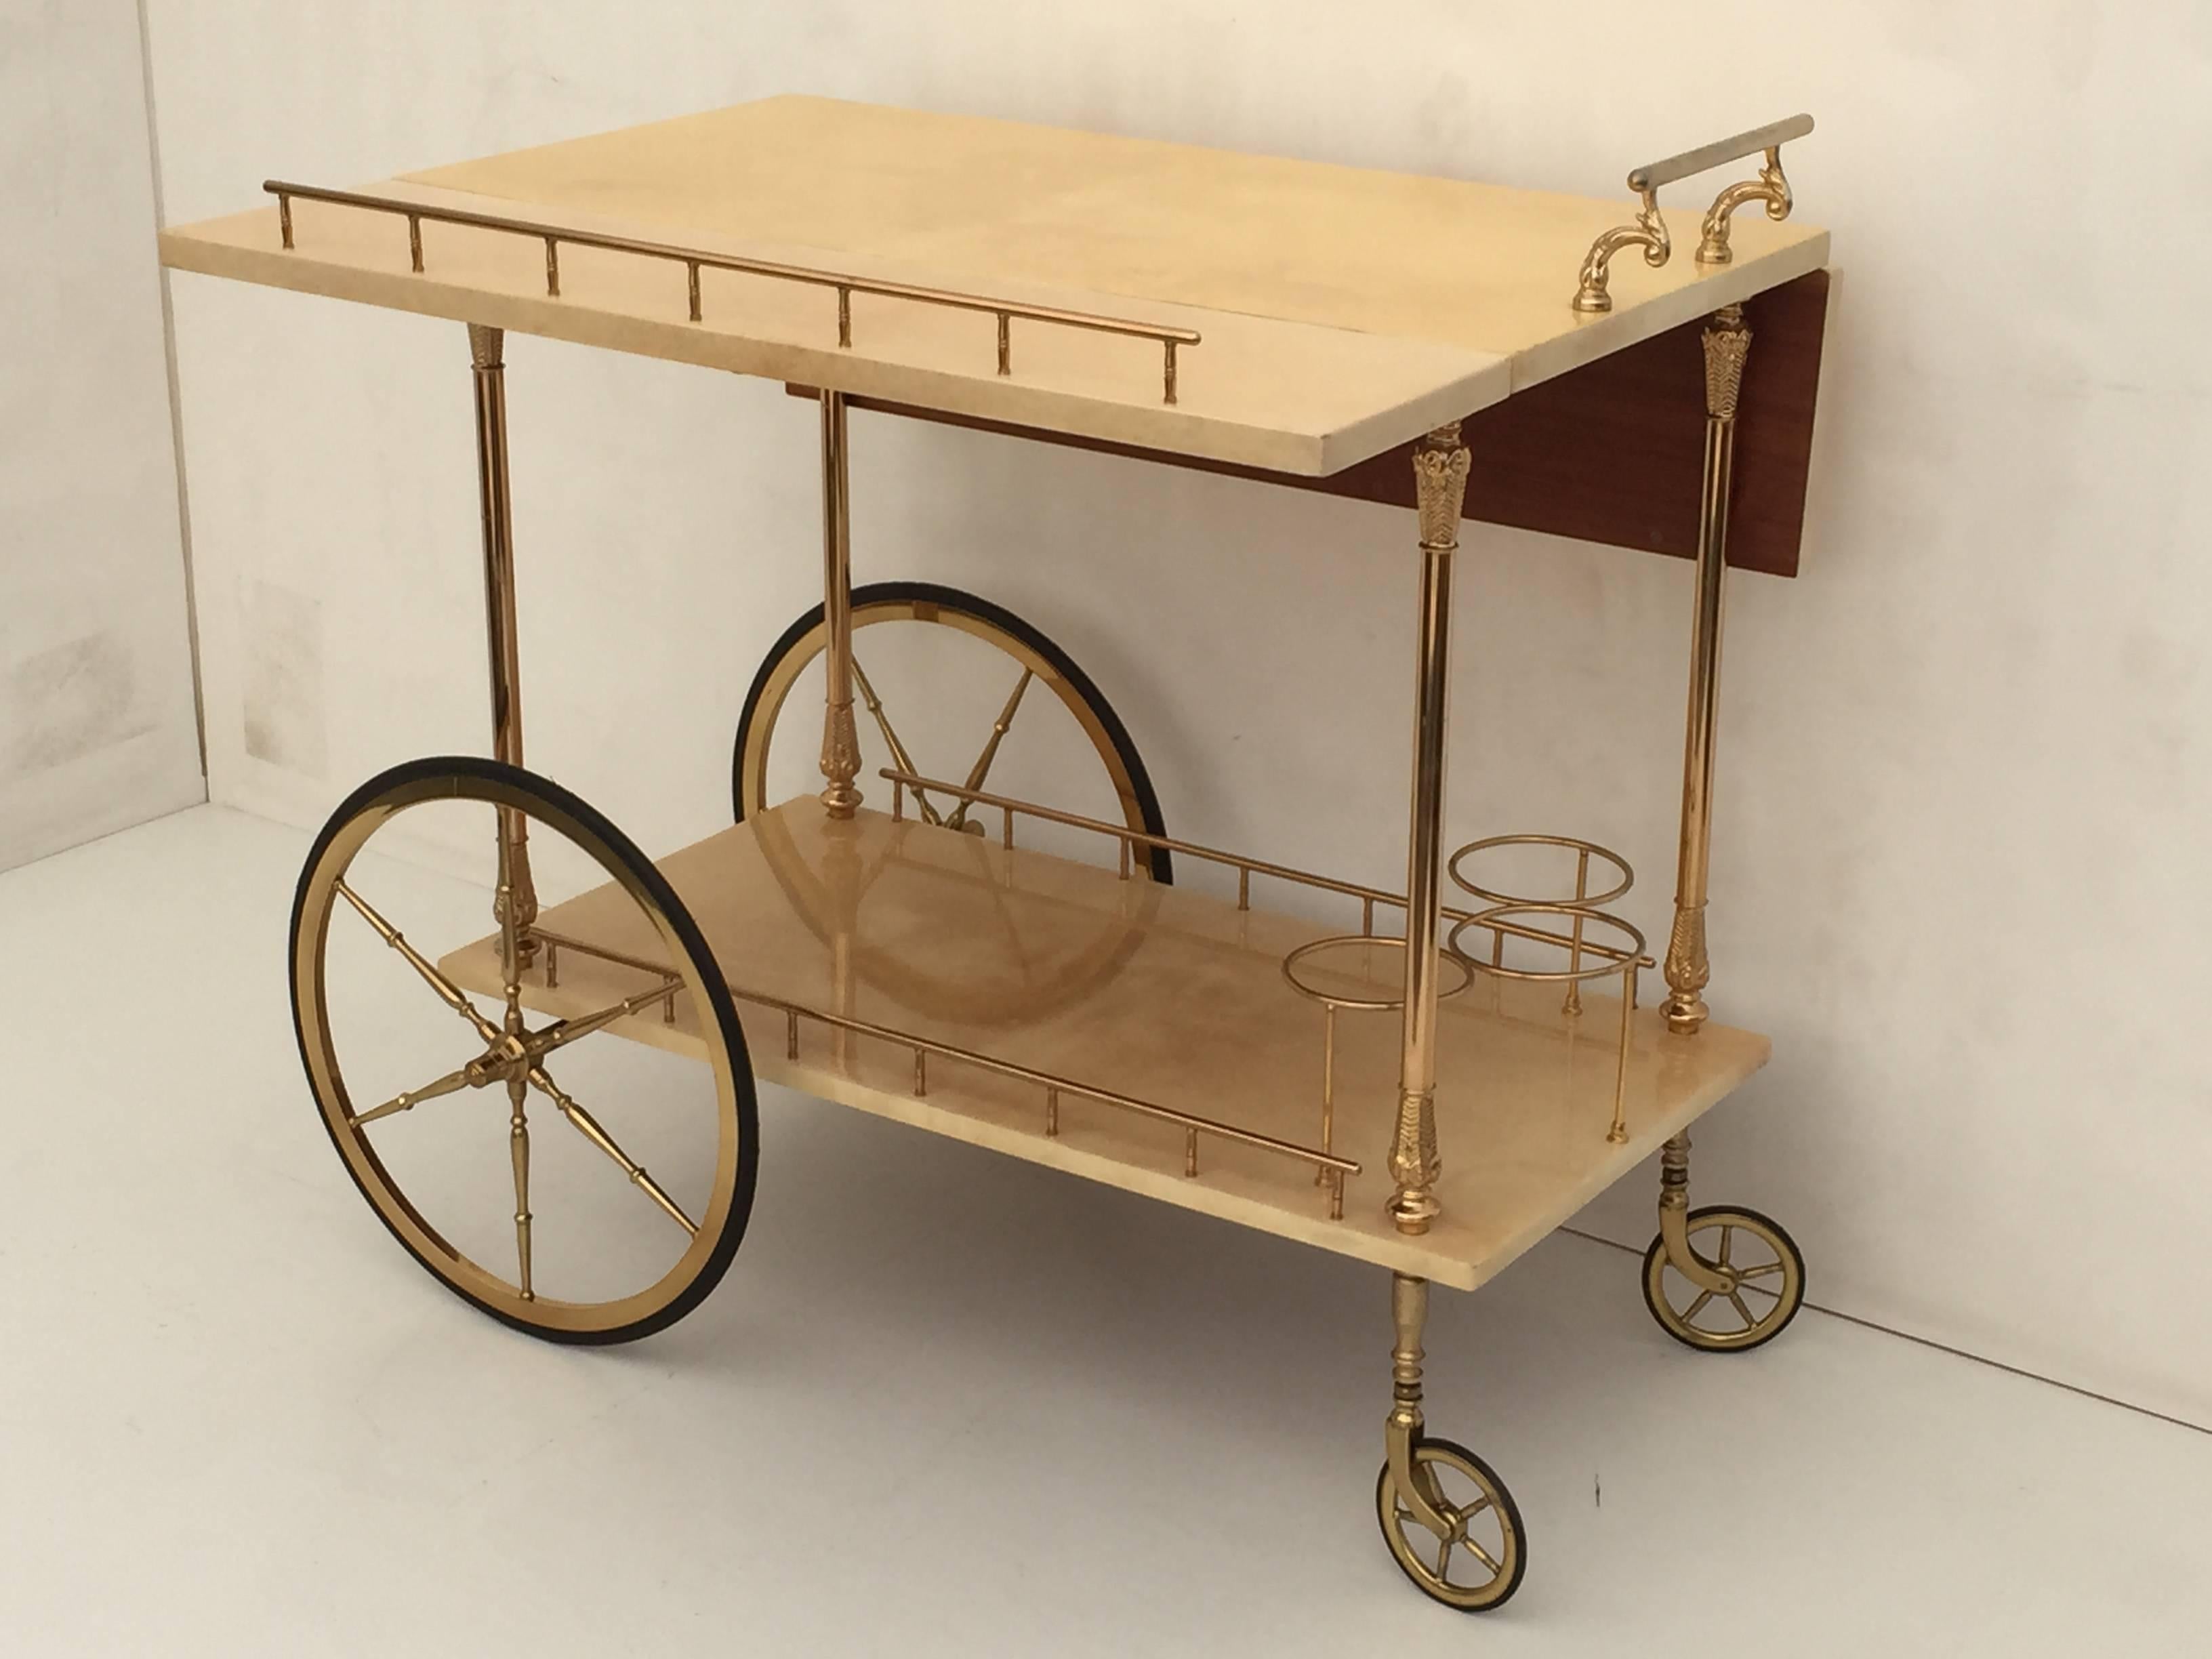 Aldo Tura parchment drop-leaf bar cart. Top in open position measures 29.25" by 29.5".
Drop leaves are faded from direct sunlight.